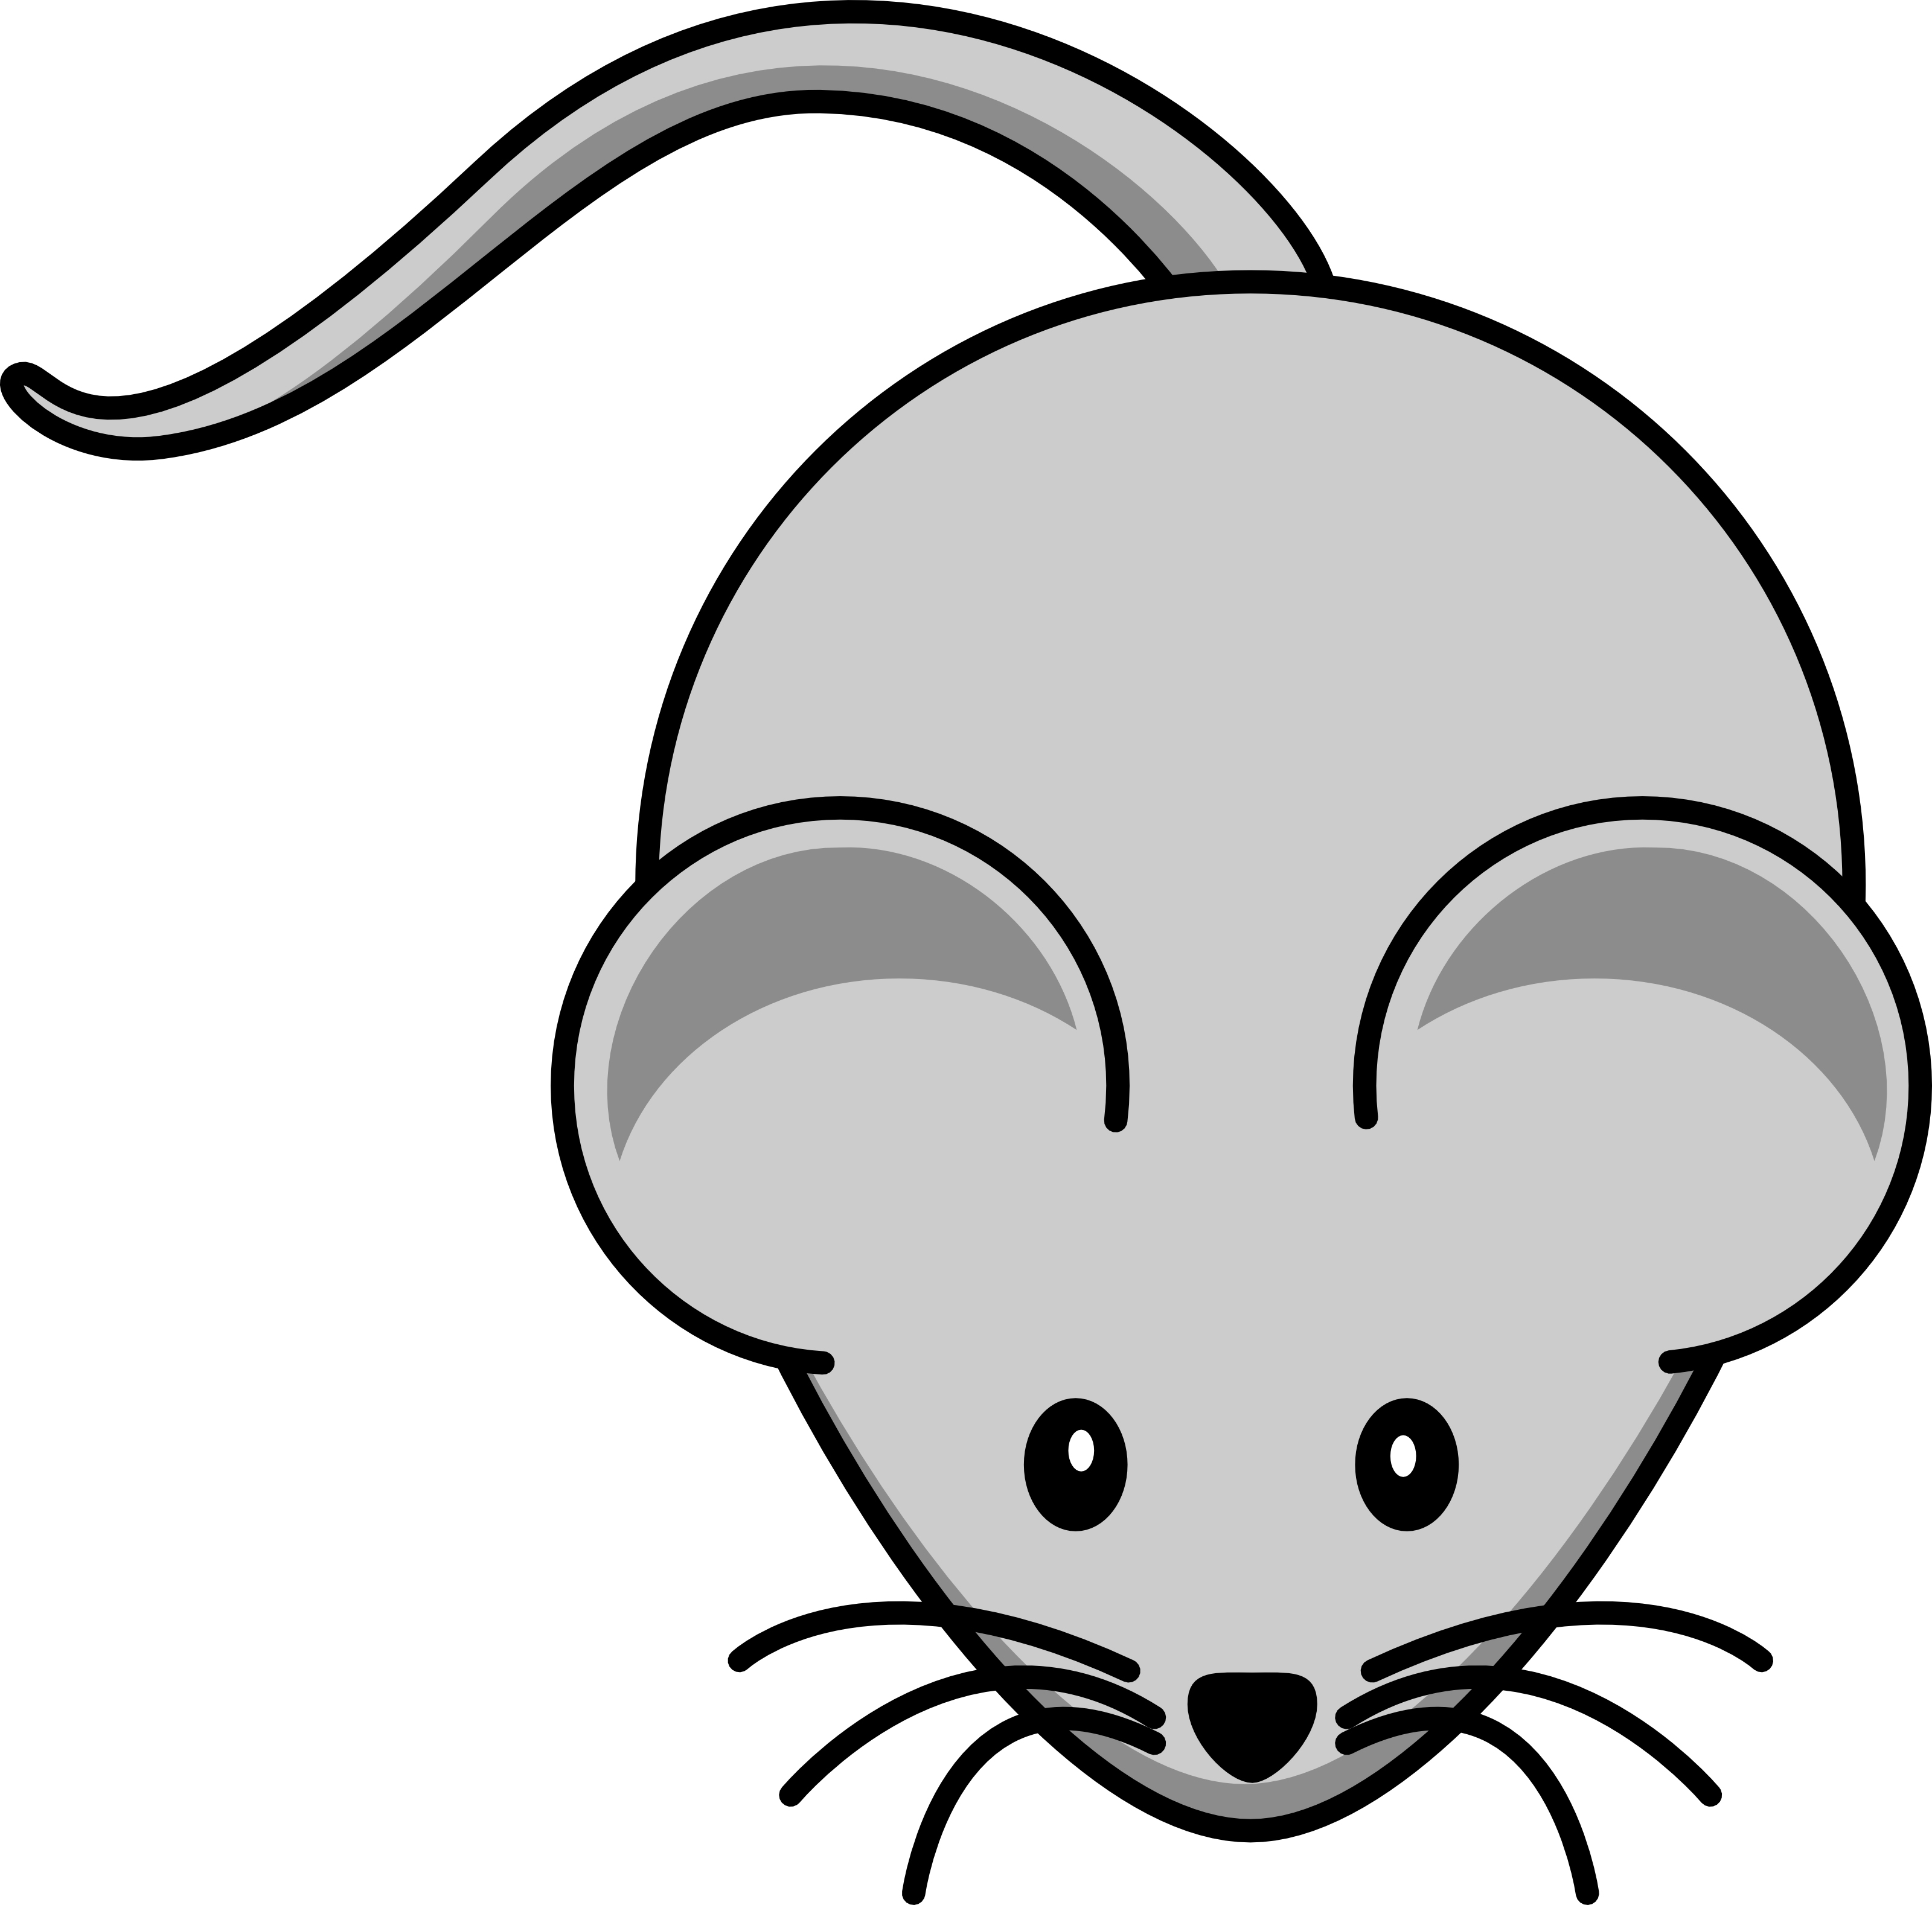 free clipart of mouse - photo #27